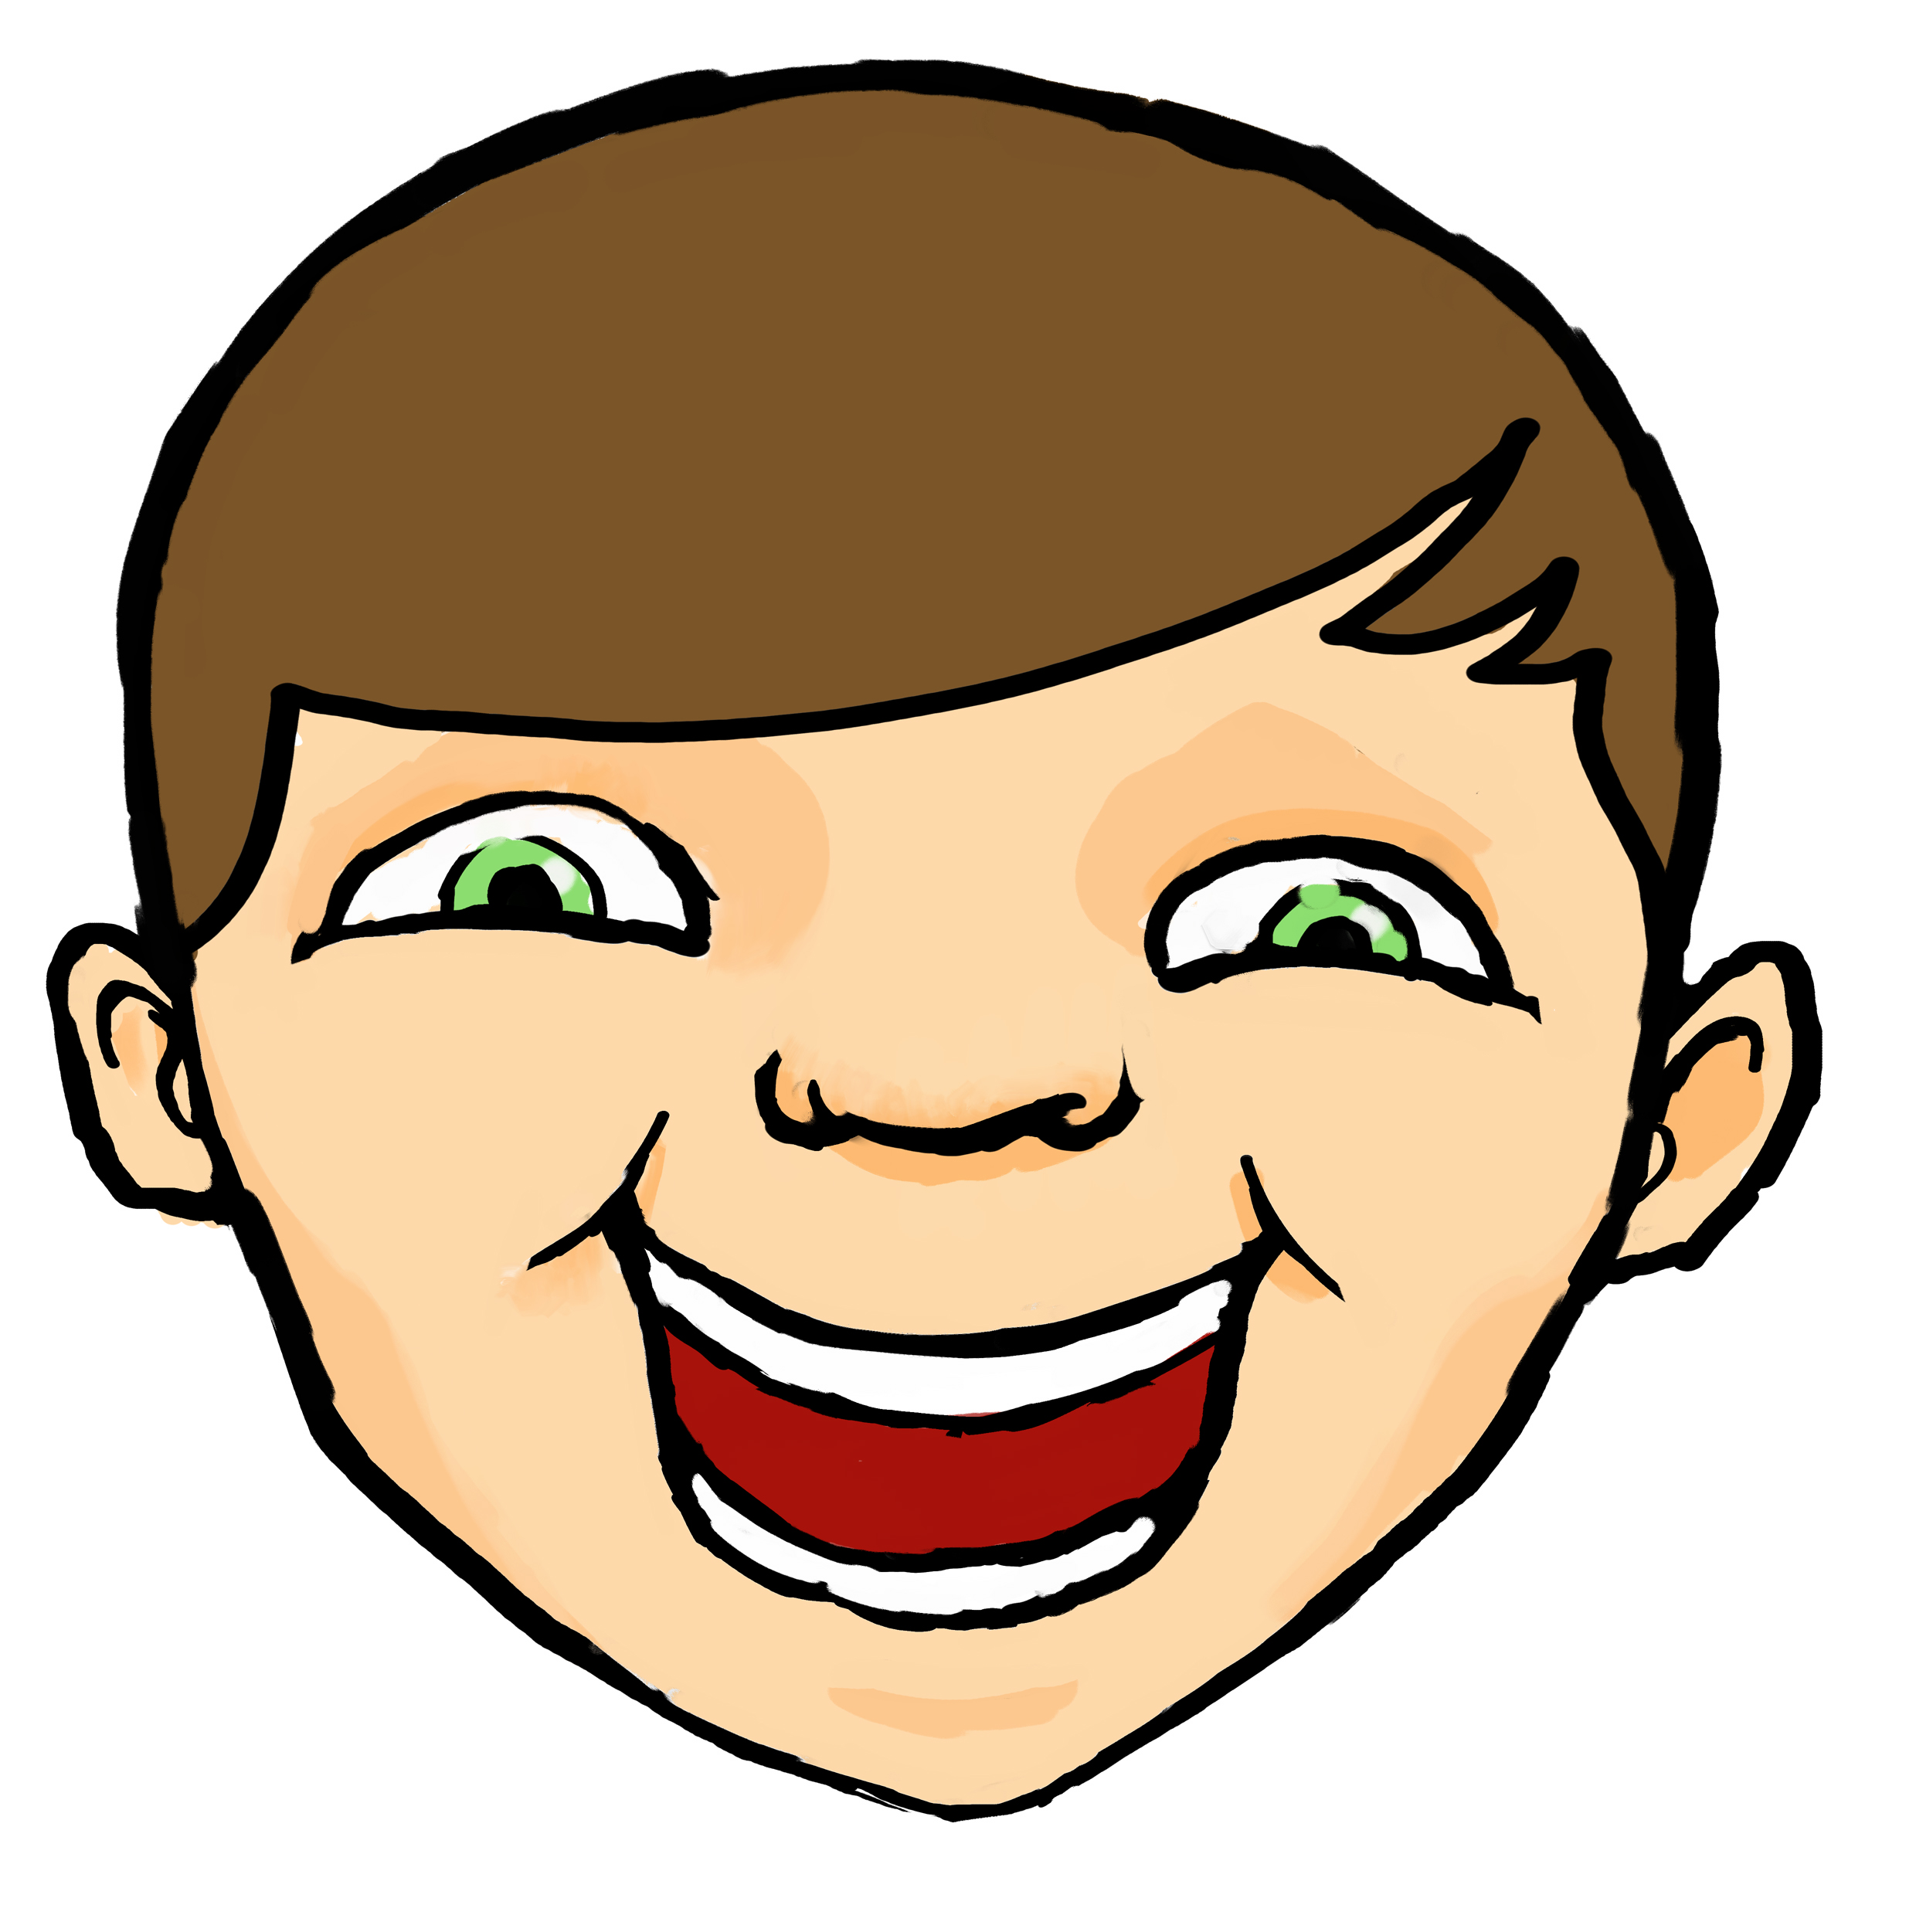 Animated Laughing Clipart - ClipArt Best